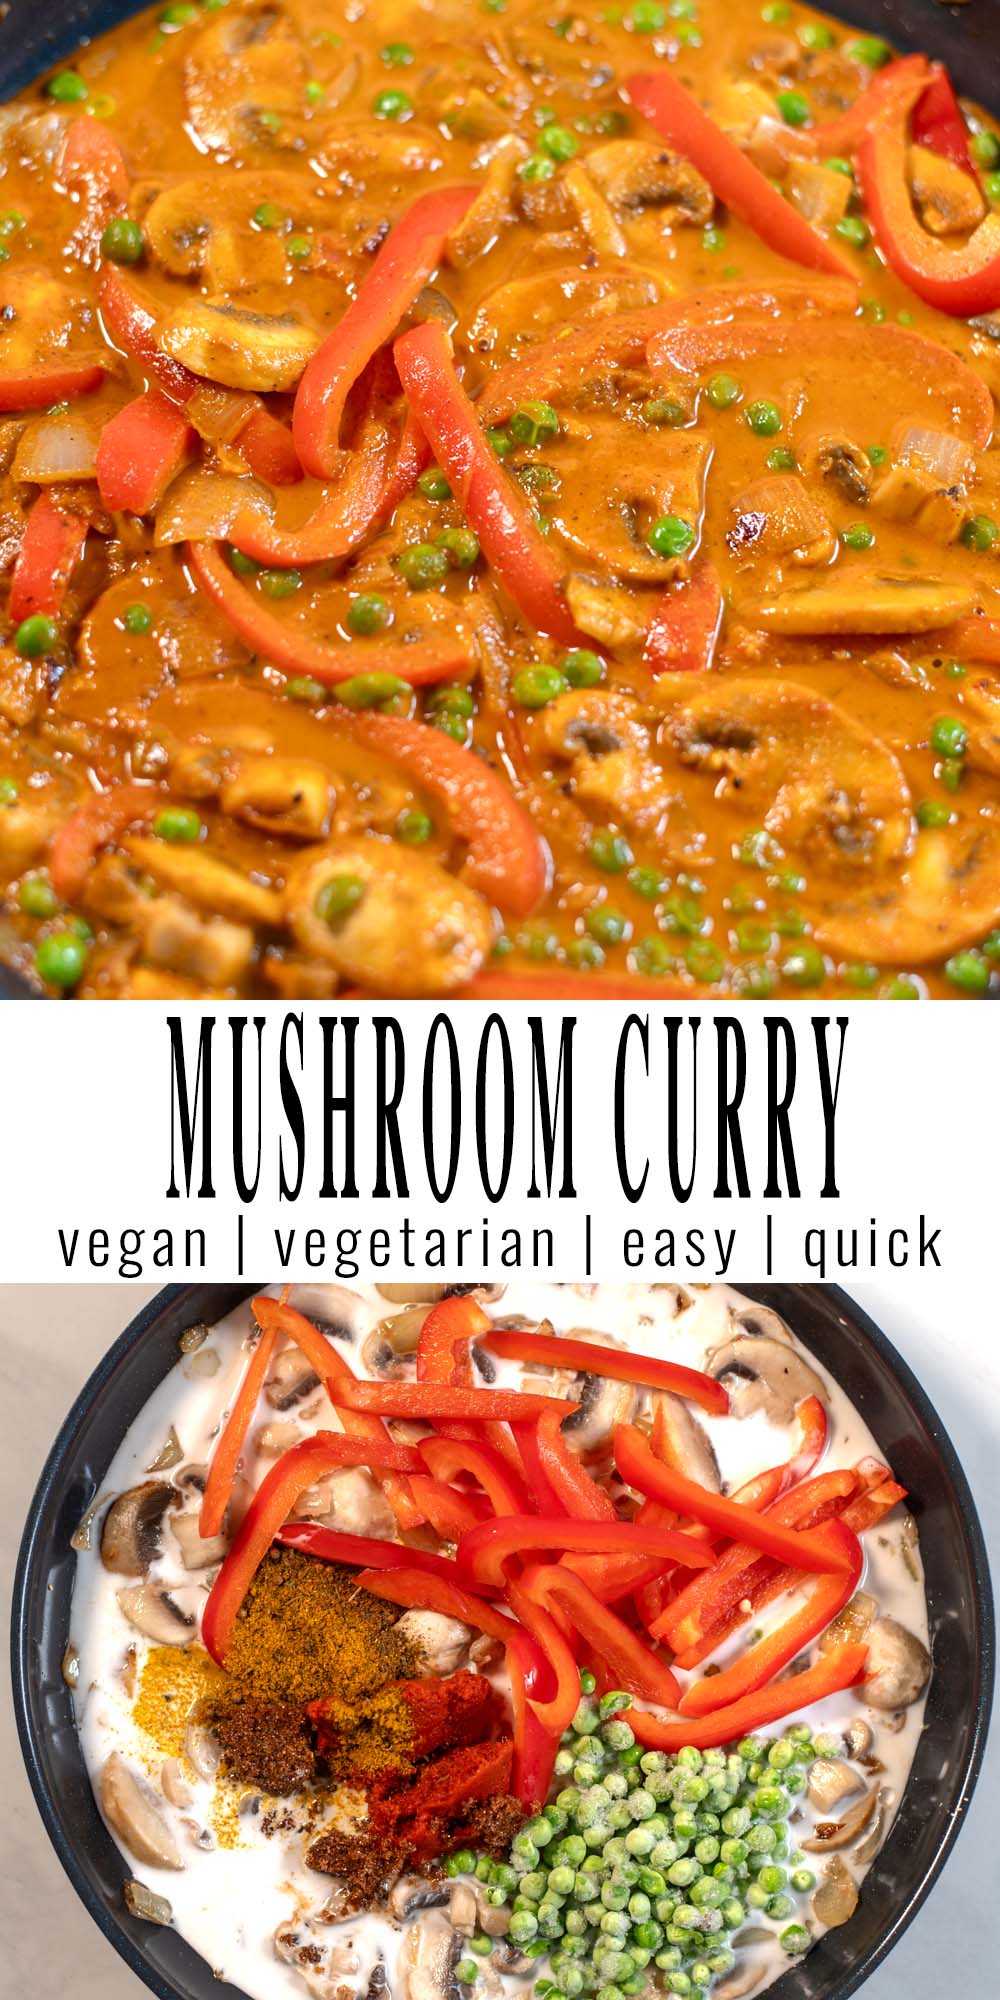 Collage of two photos of Mushroom Curry with recipe title text.